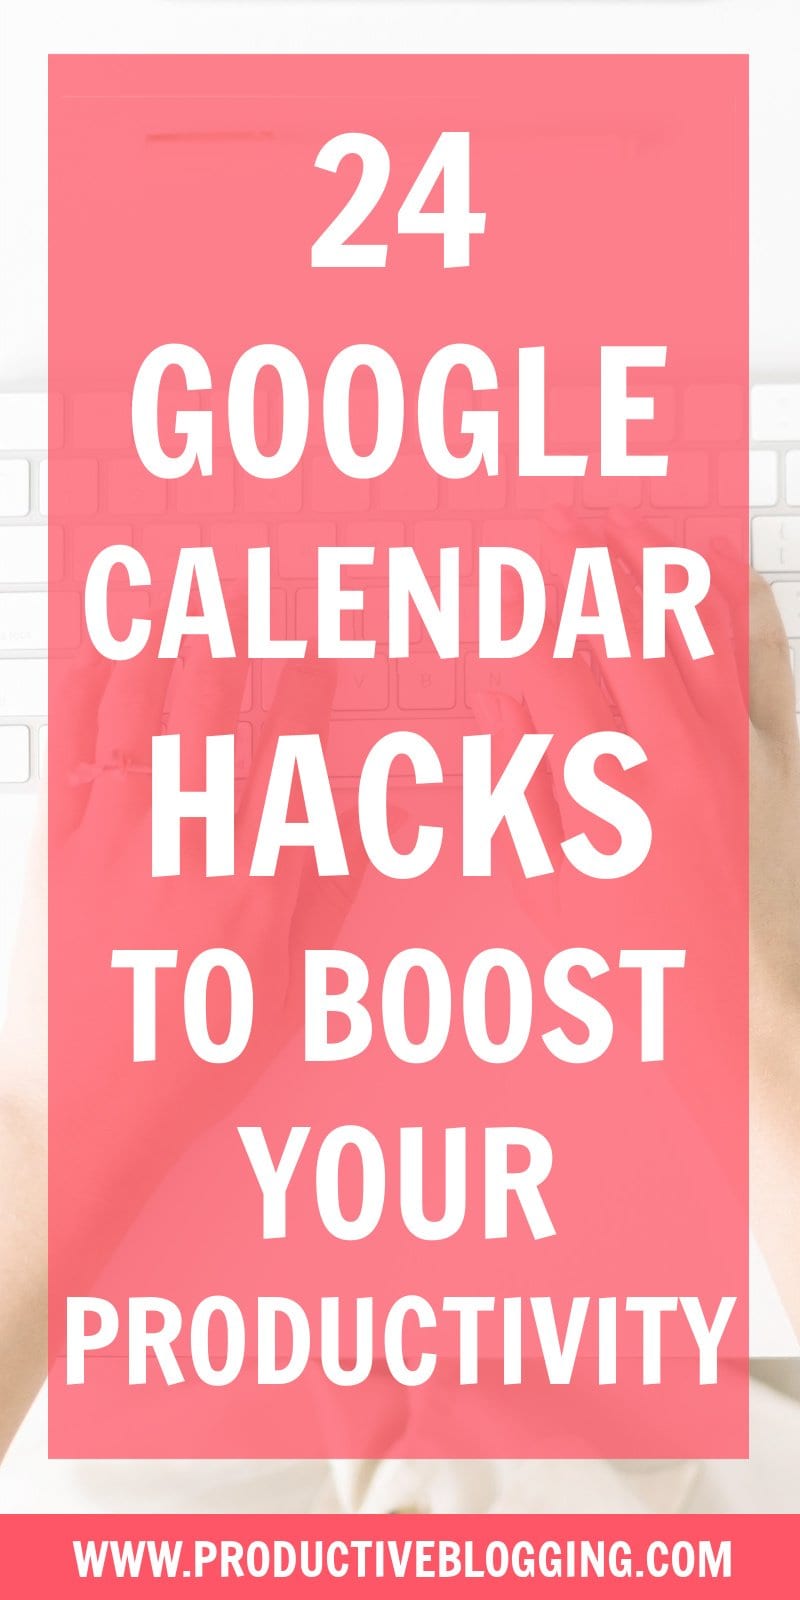 Want to be more productive? Google Calendar is full of neat tricks and shortcuts to help you be more organized. But are you using all the features? Here are 24 Google Calendar hacks to boost your productivity! #GoogleCalendar #GoogleCalendarHacks #dailyplanning #timemanagement #organized #blogging #blogger #bloggingtips #bloggersofIG #professionalblogger #solopreneur #mompreneur #fempreneur #bloggingbiz #productivitytips #productivity #productivitytips #blogsmarternotharder #productiveblogging 